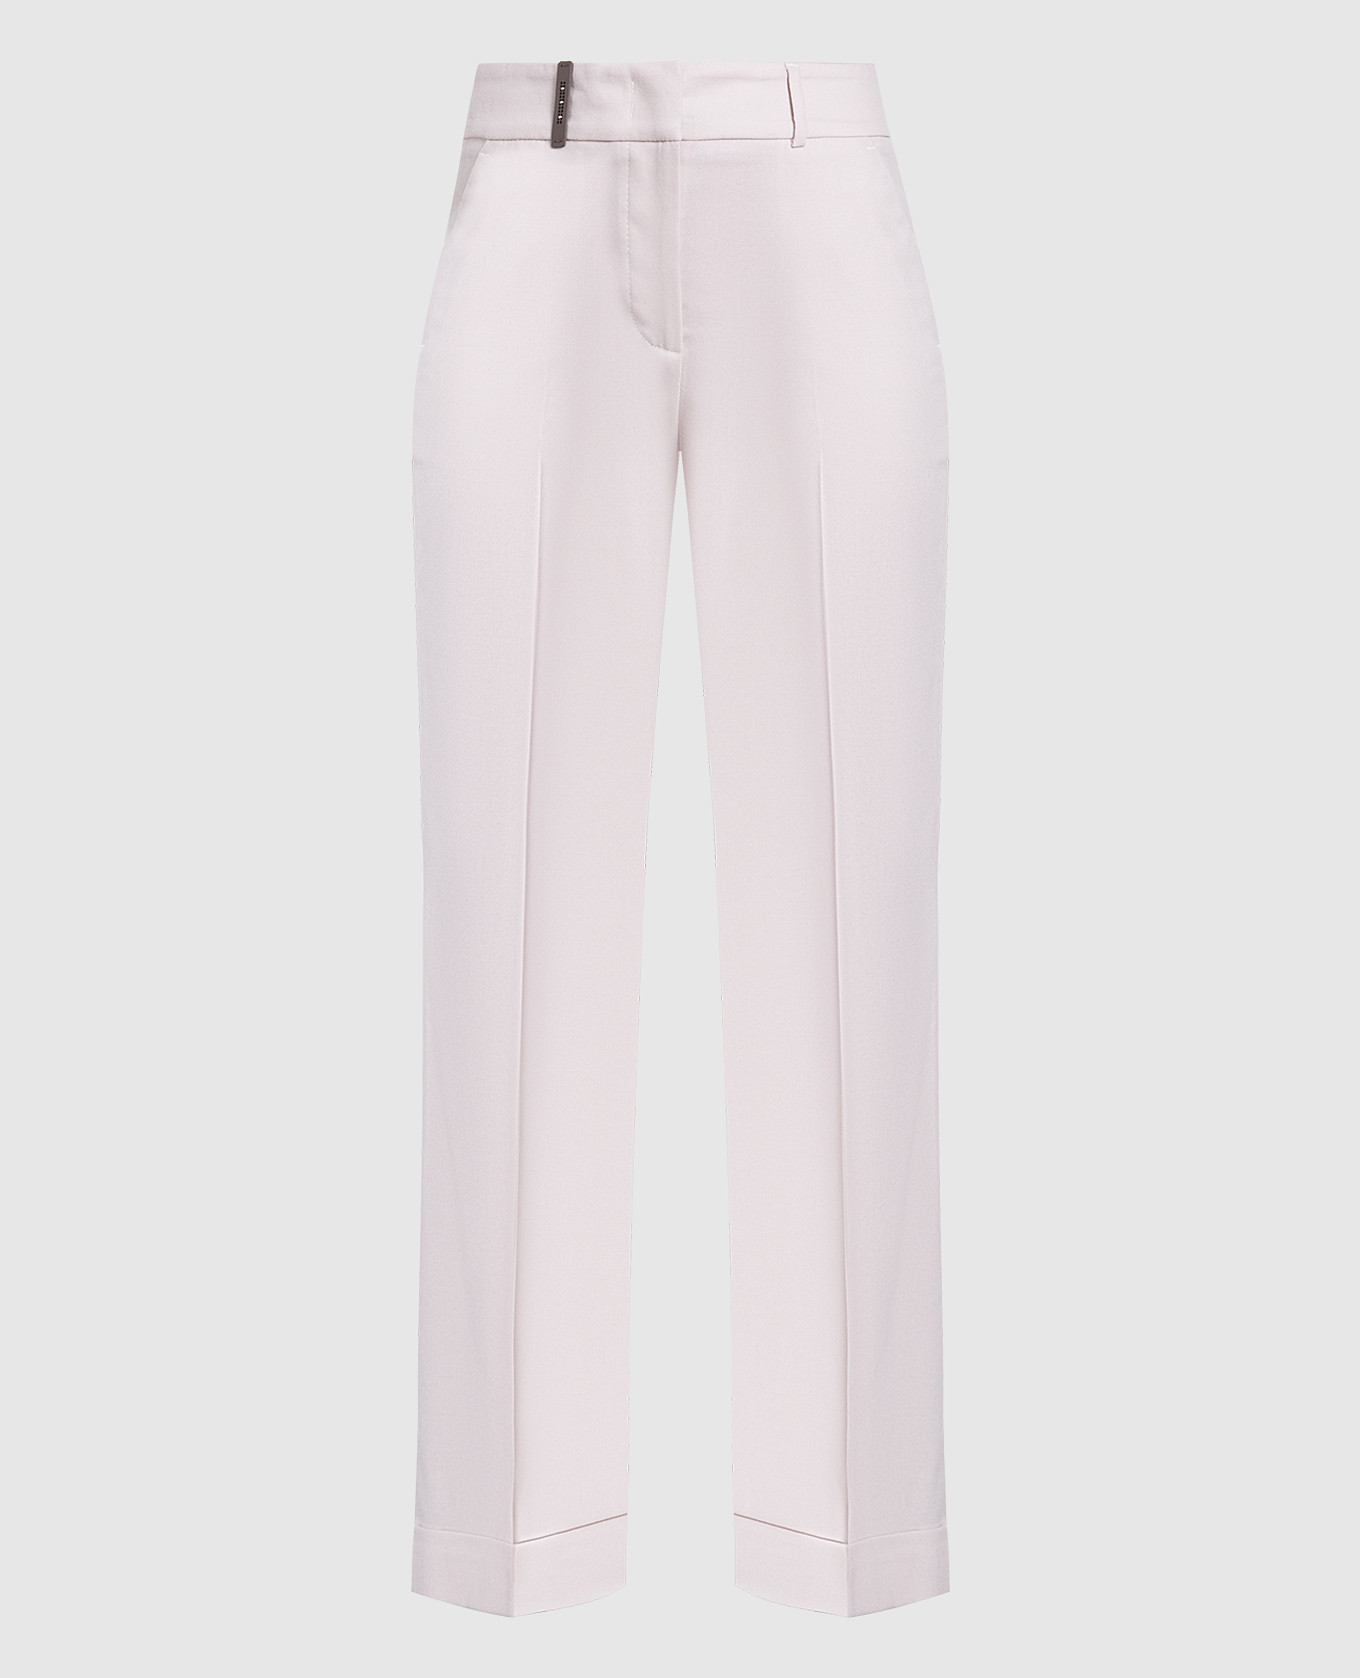 Beige pants made of wool and cashmere